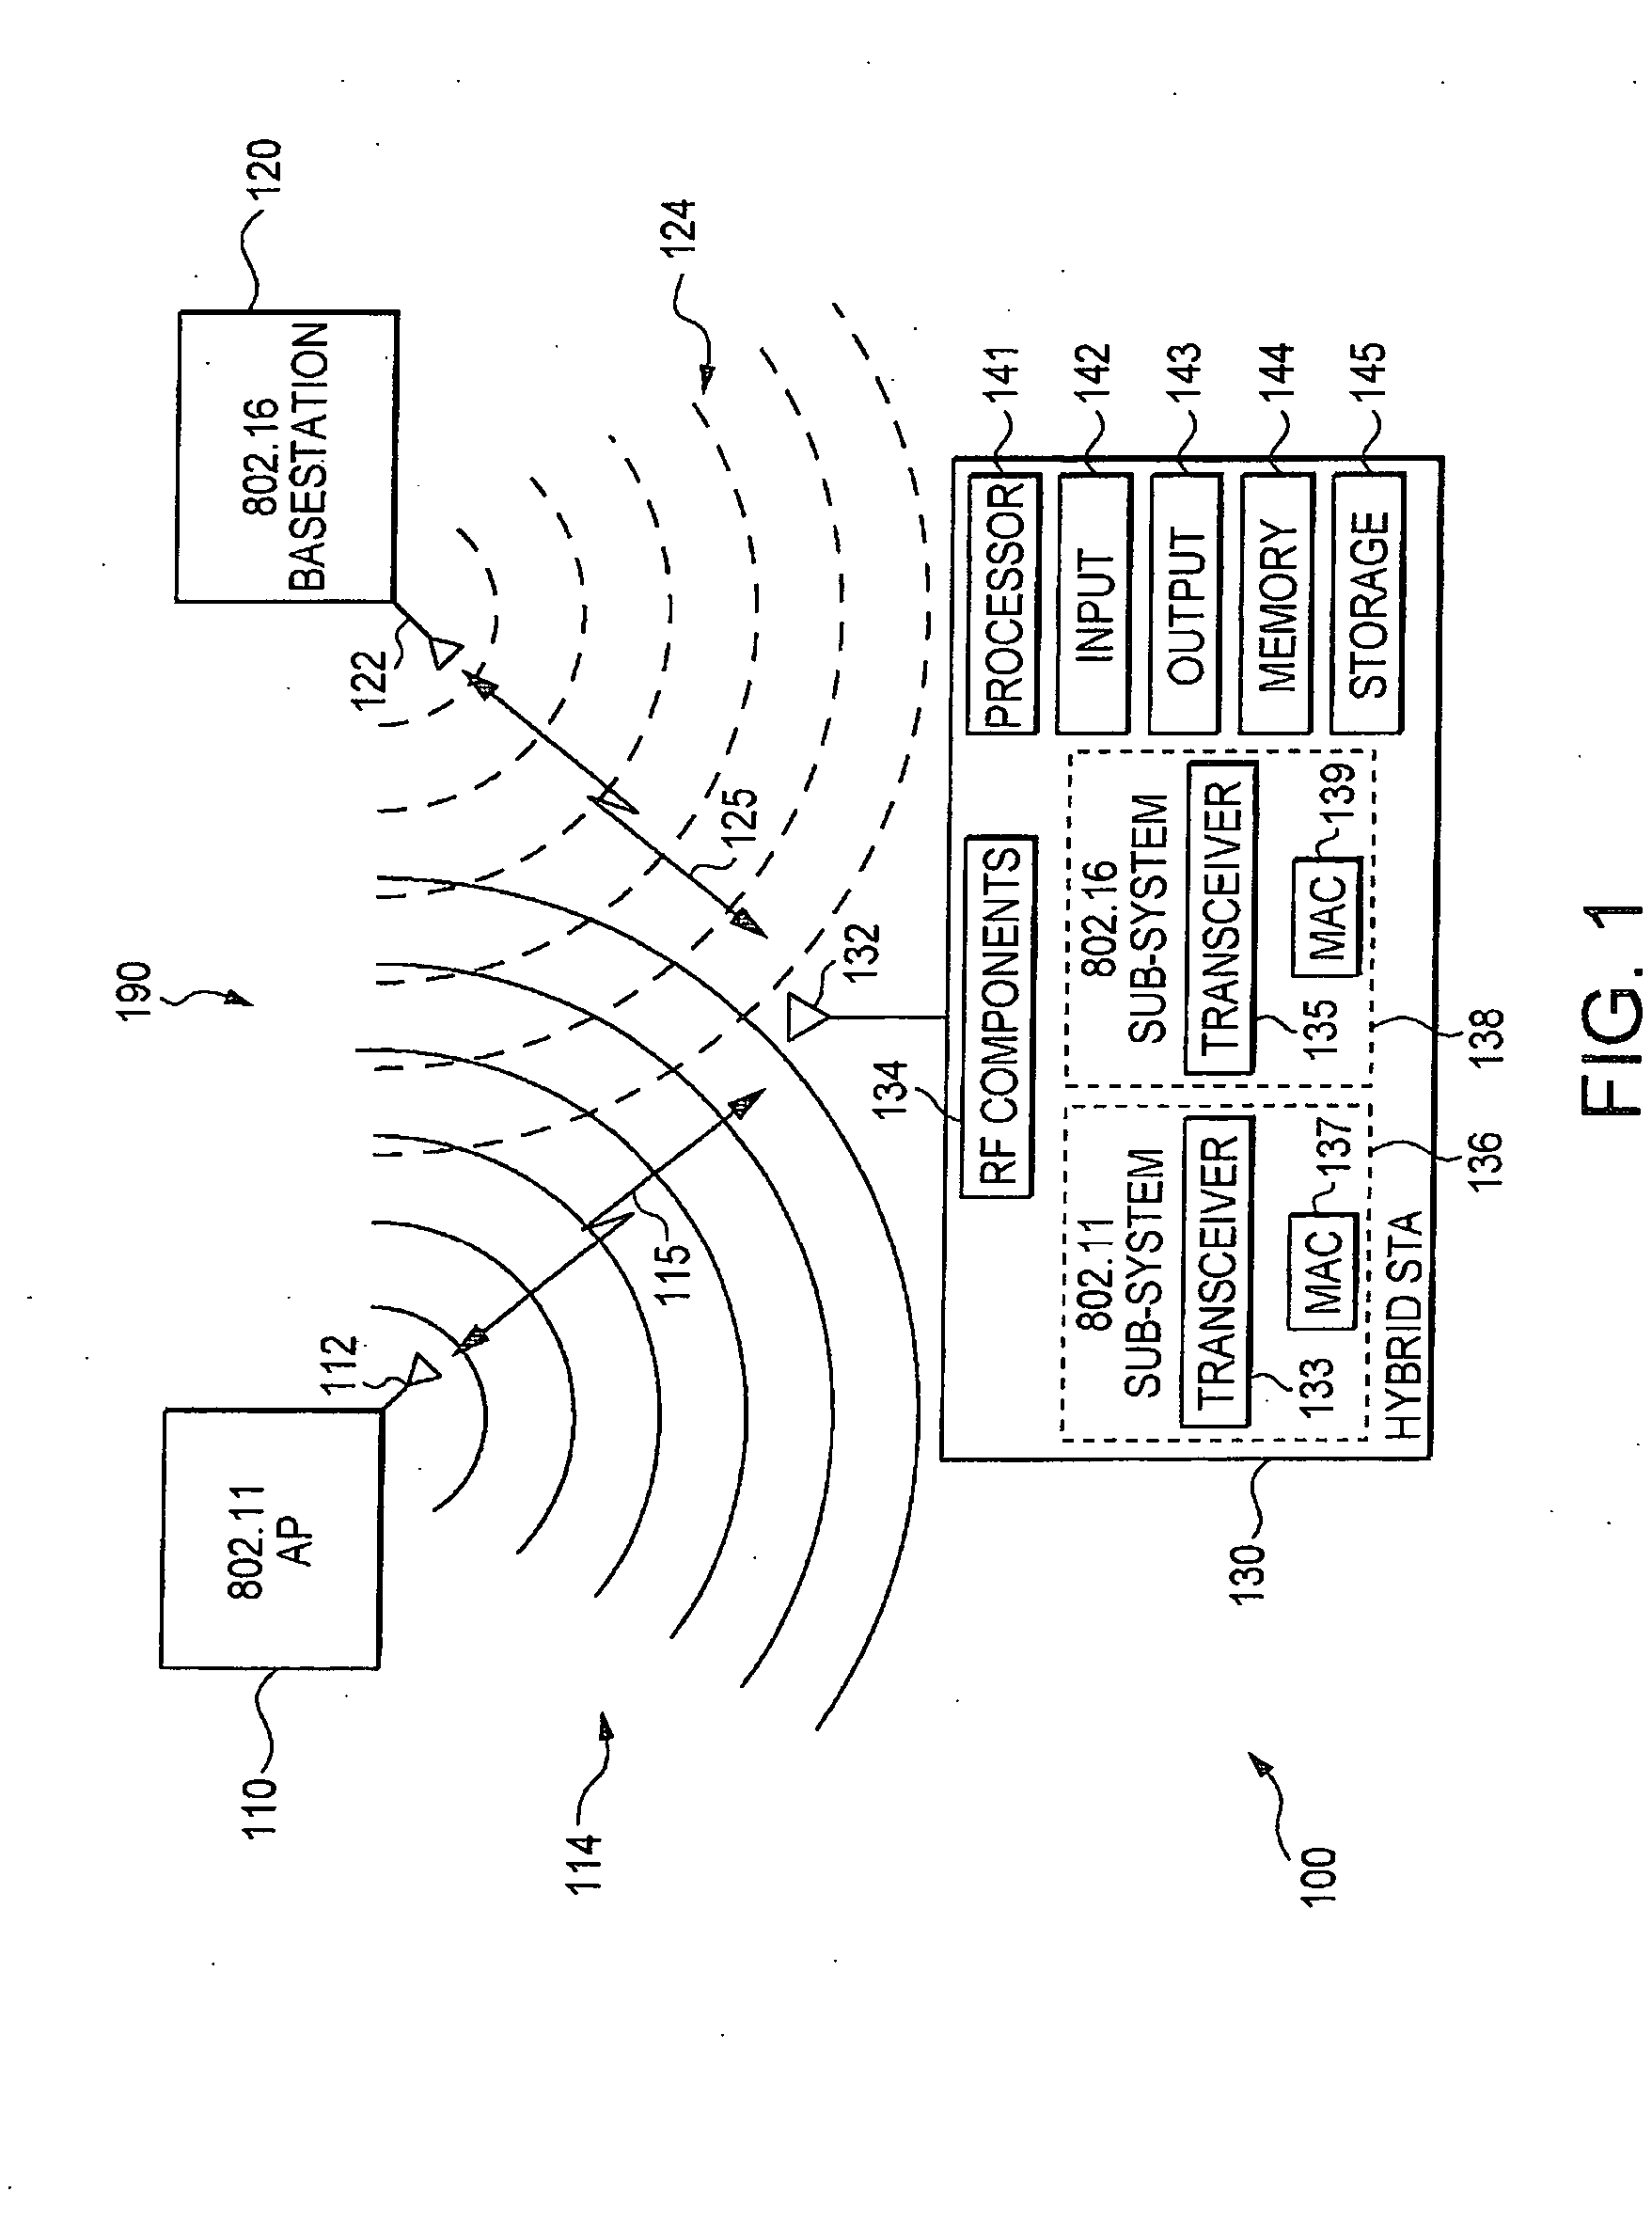 Device, system and method of layer 2 handover between heterogeneous networks